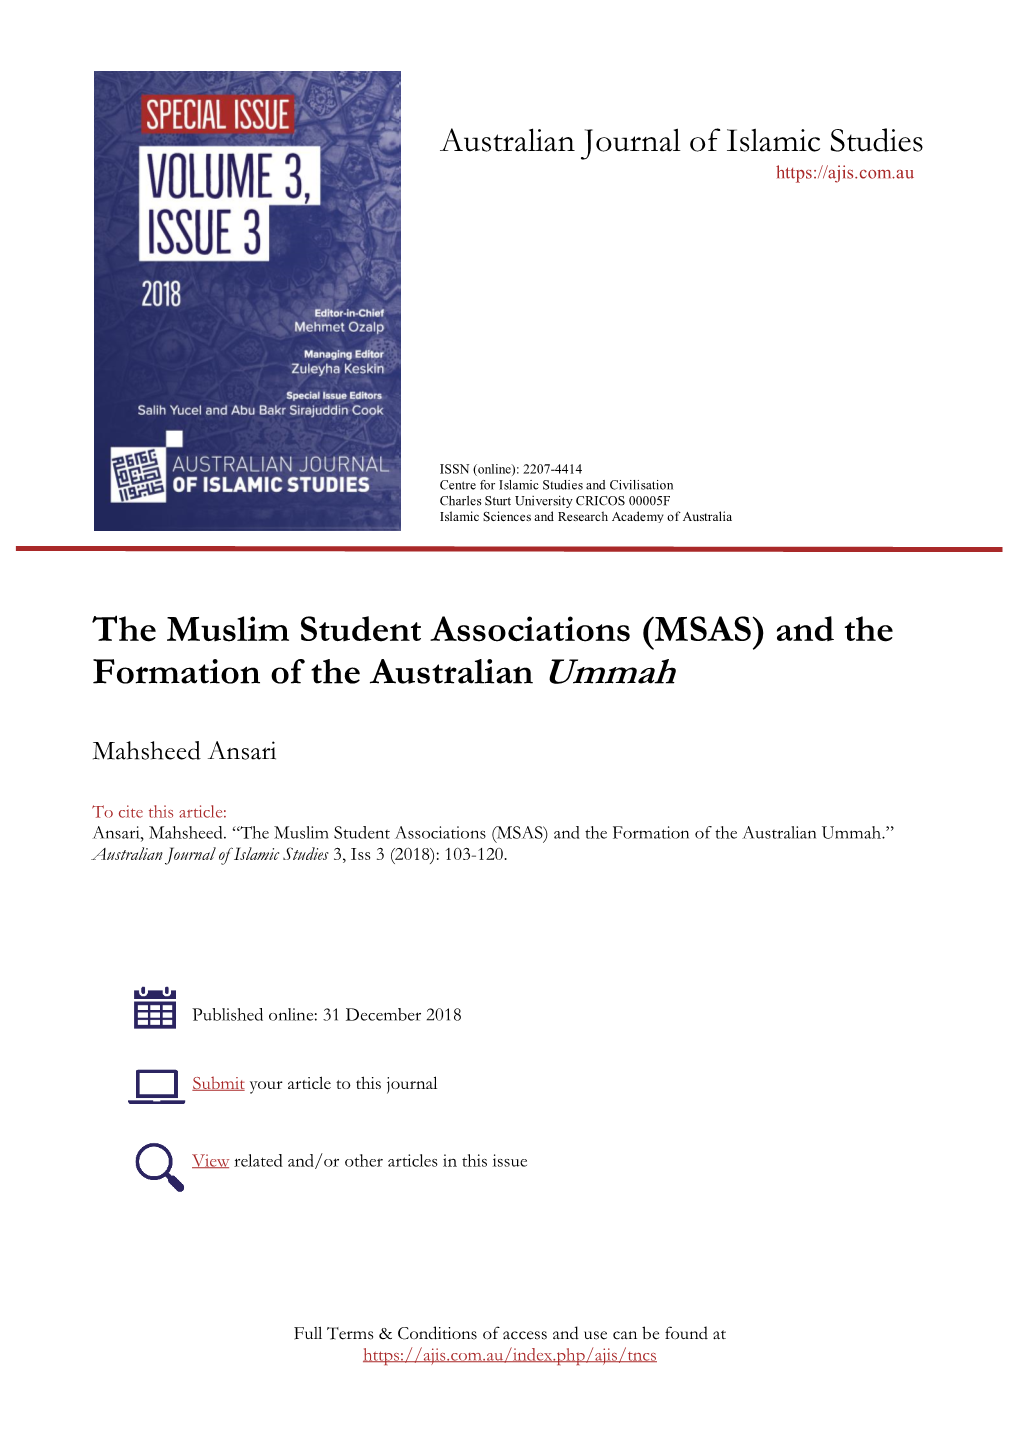 The Muslim Student Associations (MSAS) and the Formation of the Australian Ummah